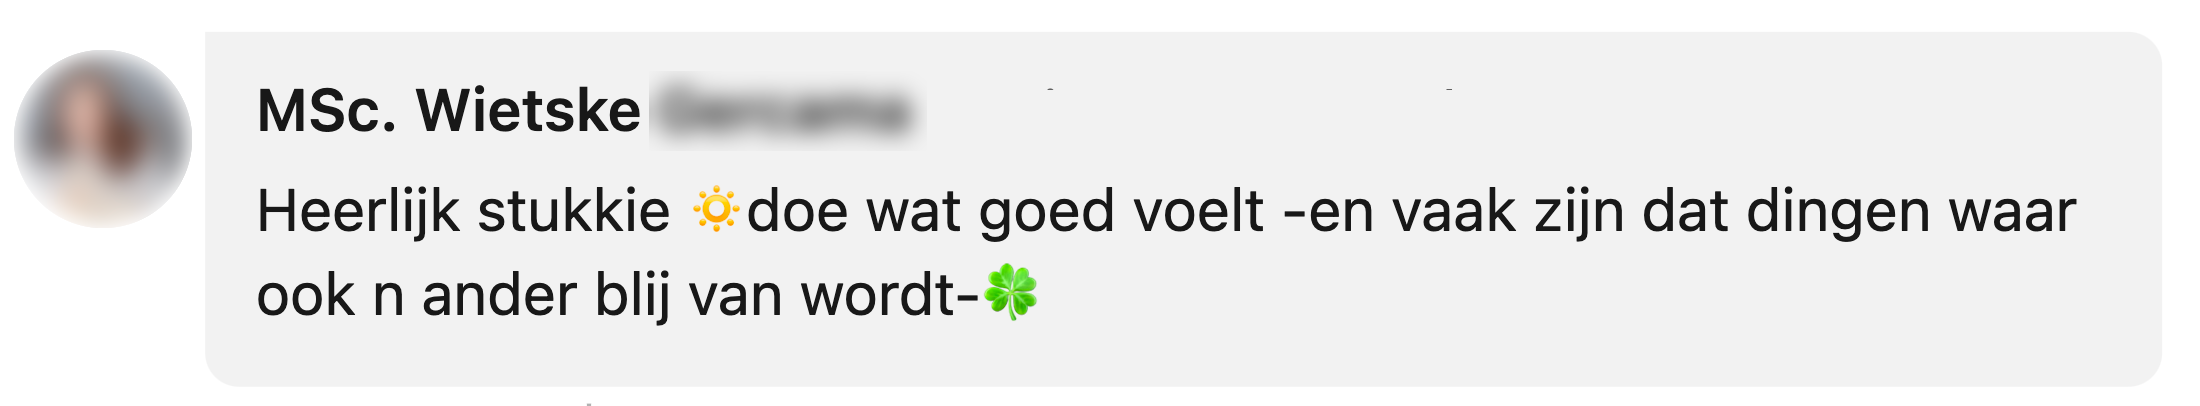 linkedin comment 4 goede daad